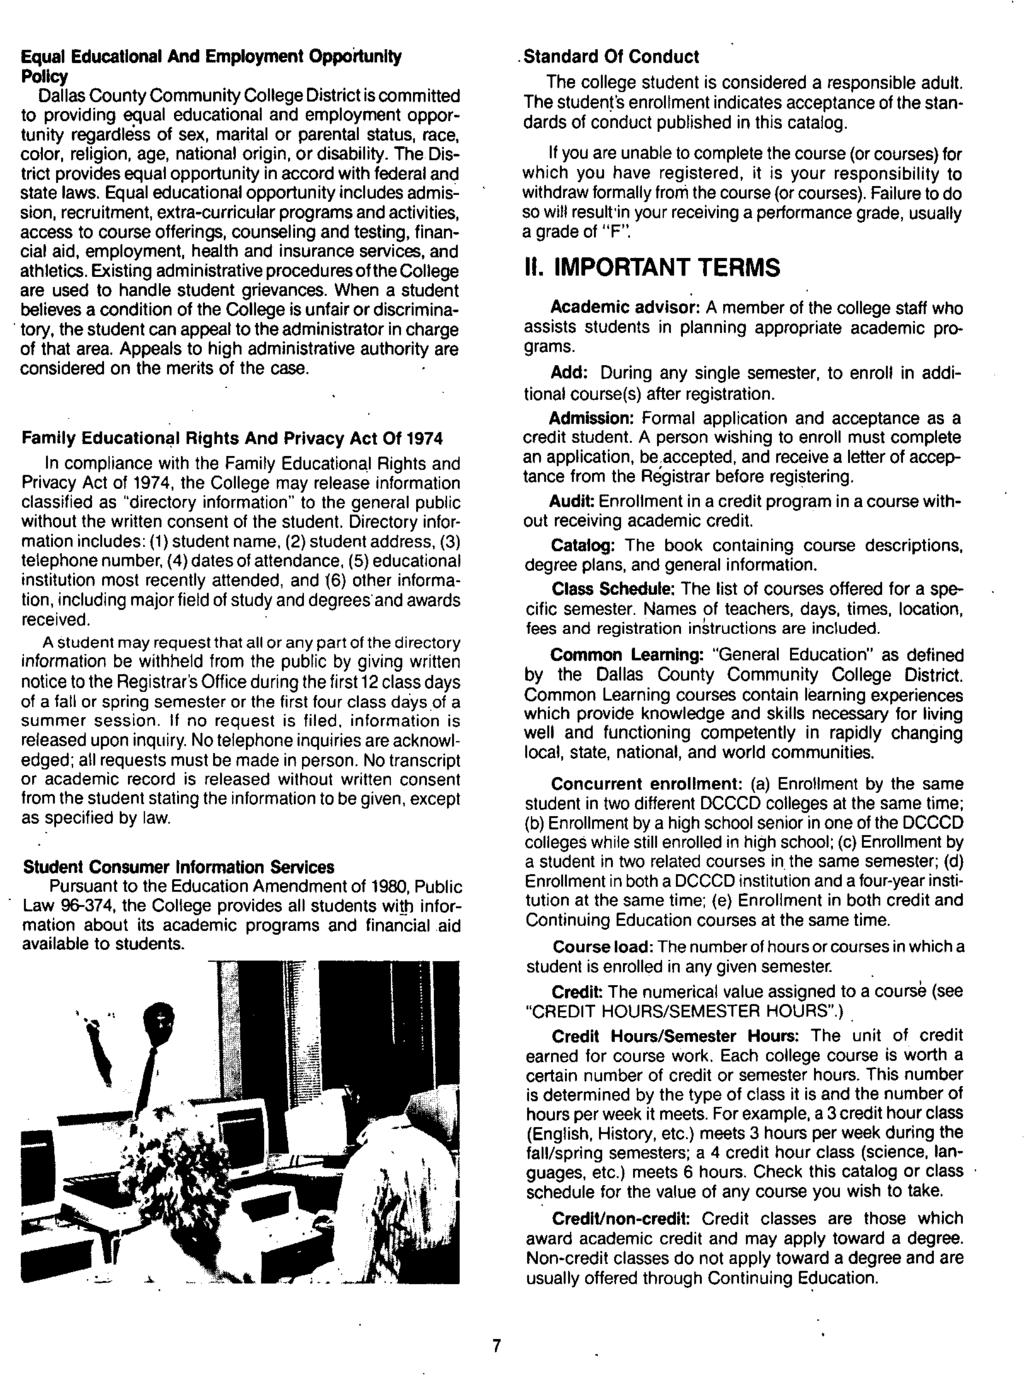 Equal Educational And Employment Opportunity Policy Dallas County Community College District is committed to providing equal educational and employment opportunity regardless of sex, marital or